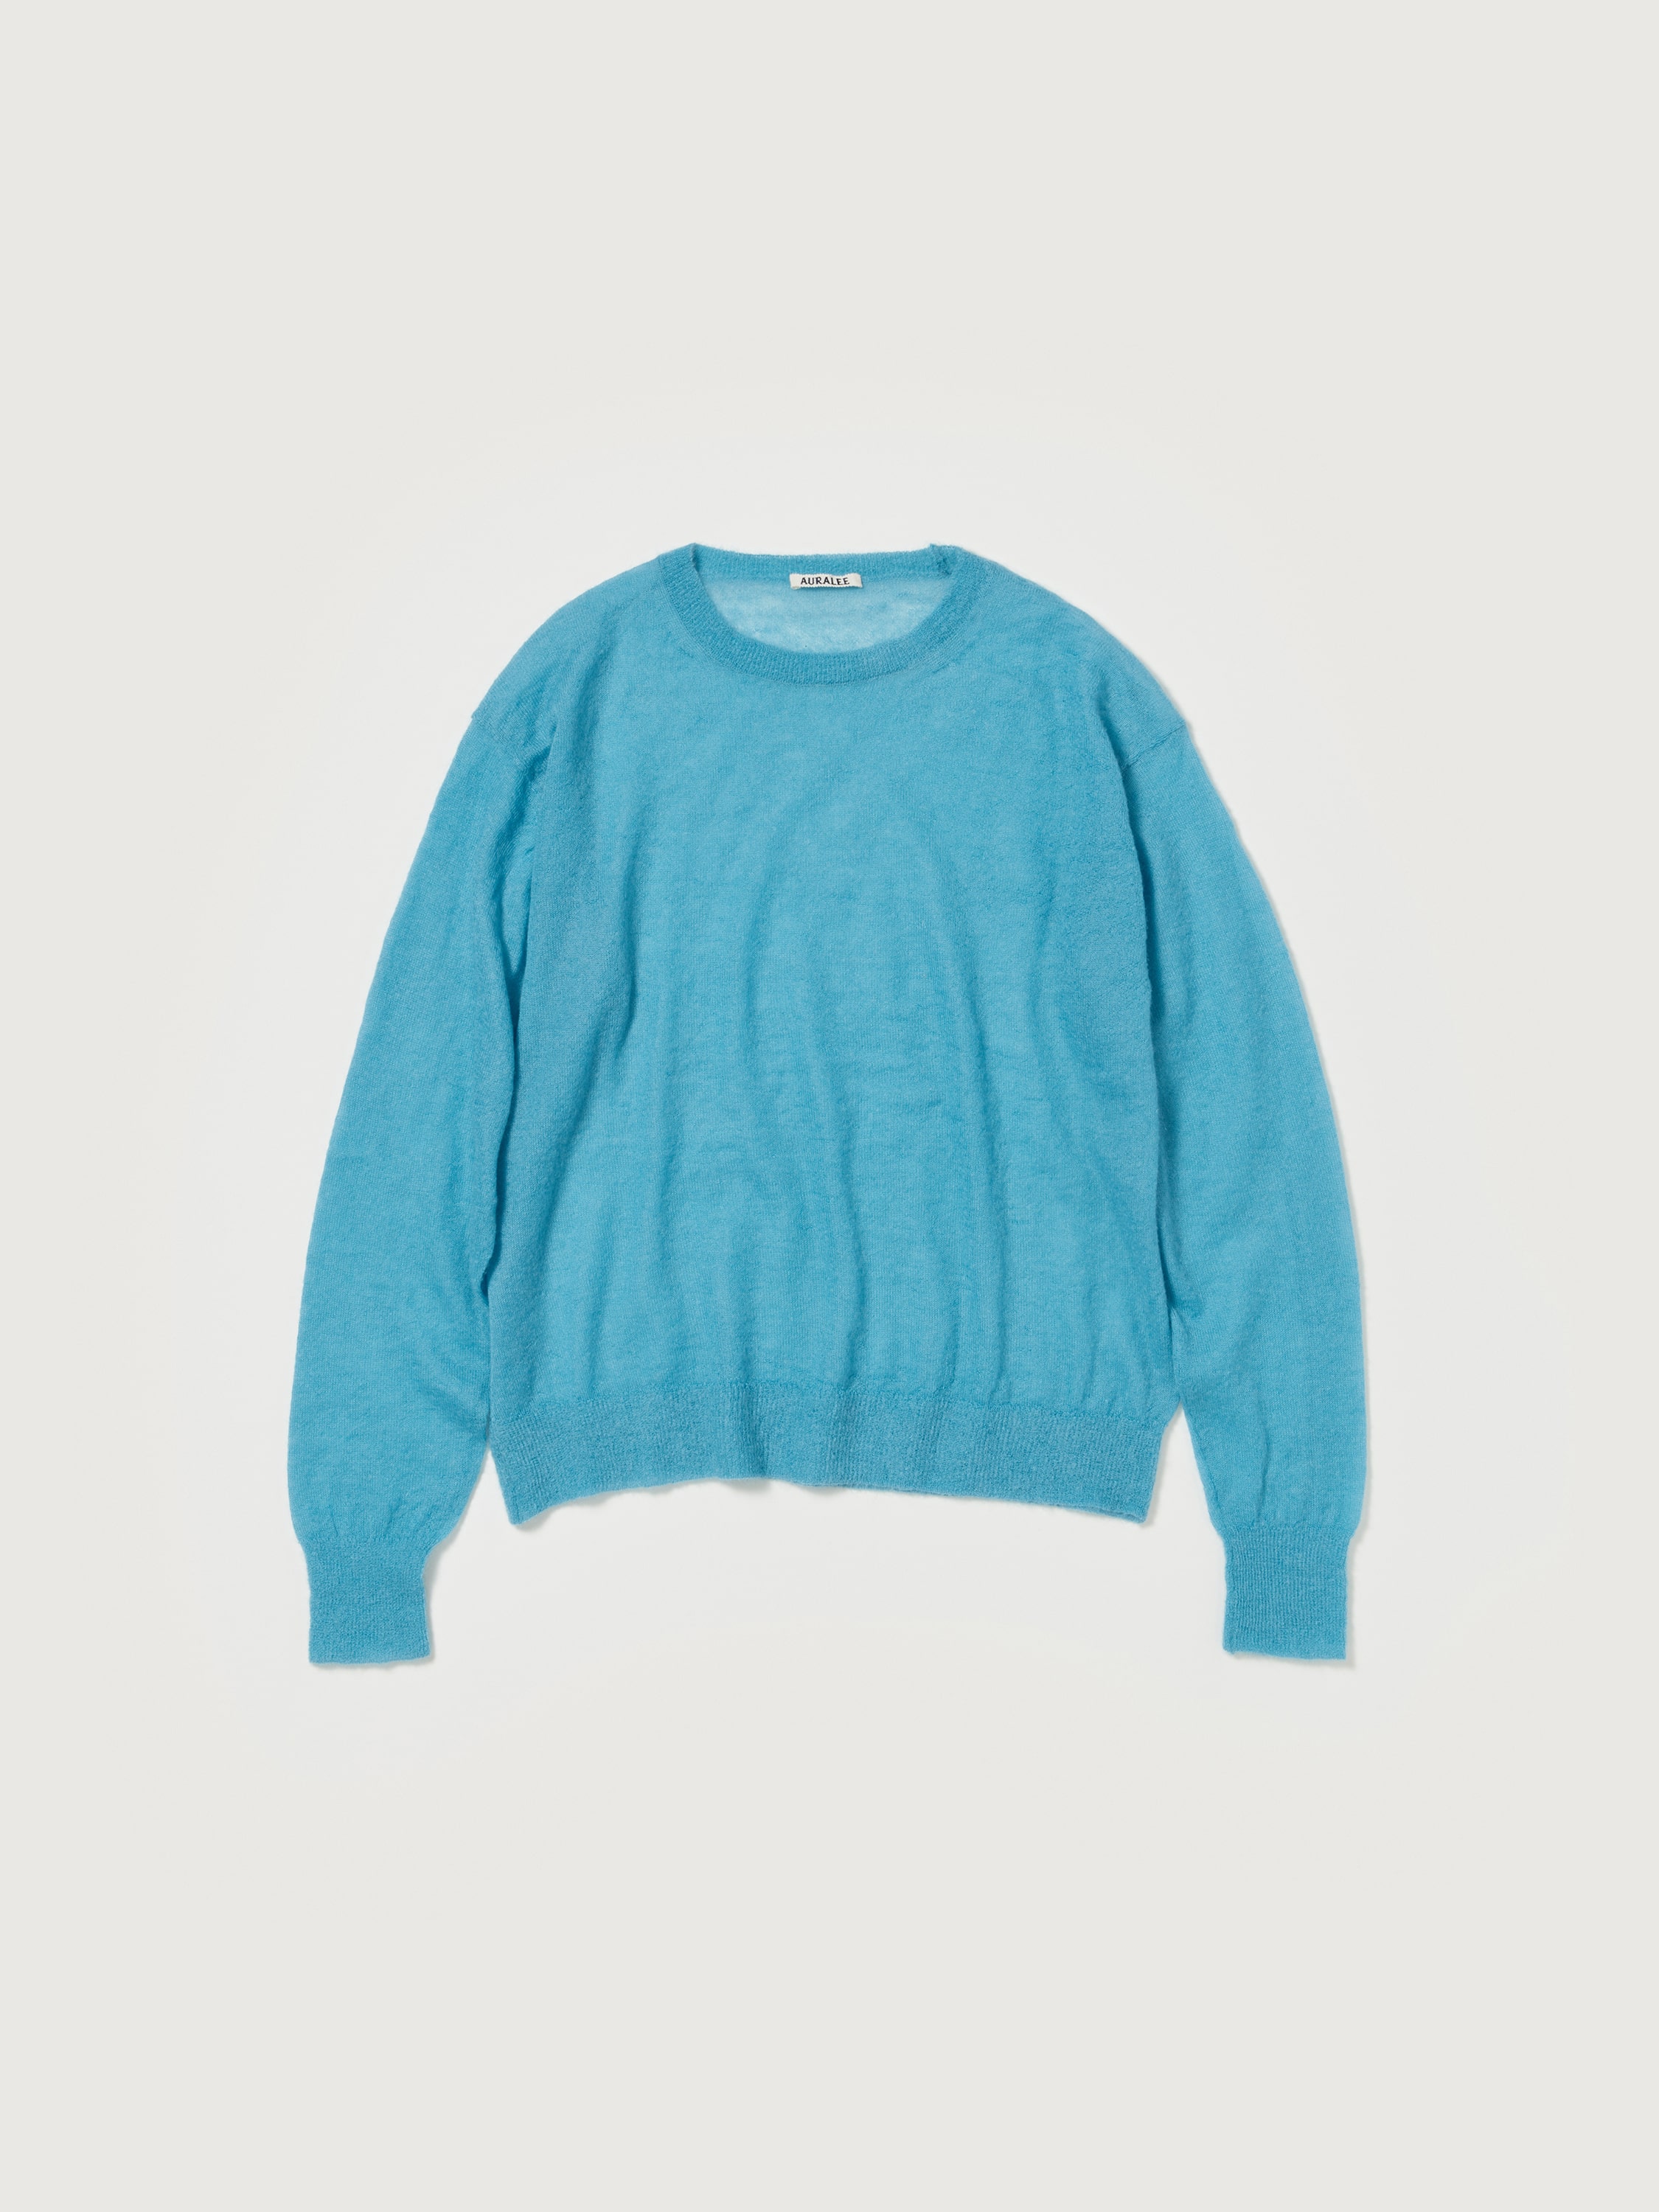 KID MOHAIR SHEER KNIT P/O 詳細画像 TURQUOISE BLUE 1